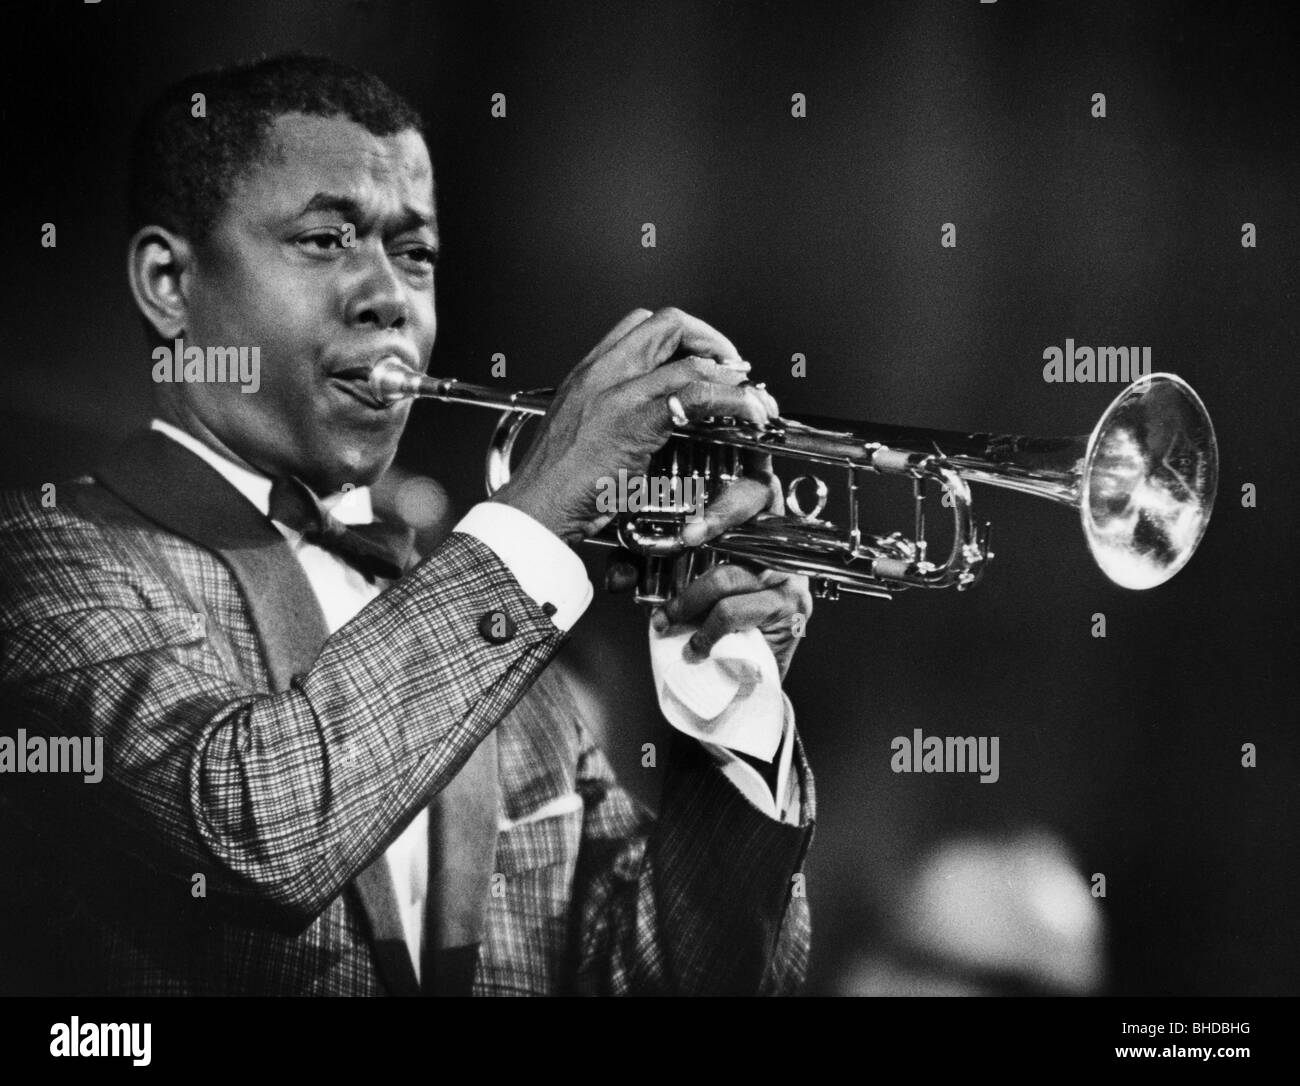 Mo, Billy, 22.2.1923 - 16.7.2004, German musician (jazz trumpeter), half length, playing trumpet, at the Schlager Festival in Baden-Baden, Germany, 15.6.1963, Stock Photo